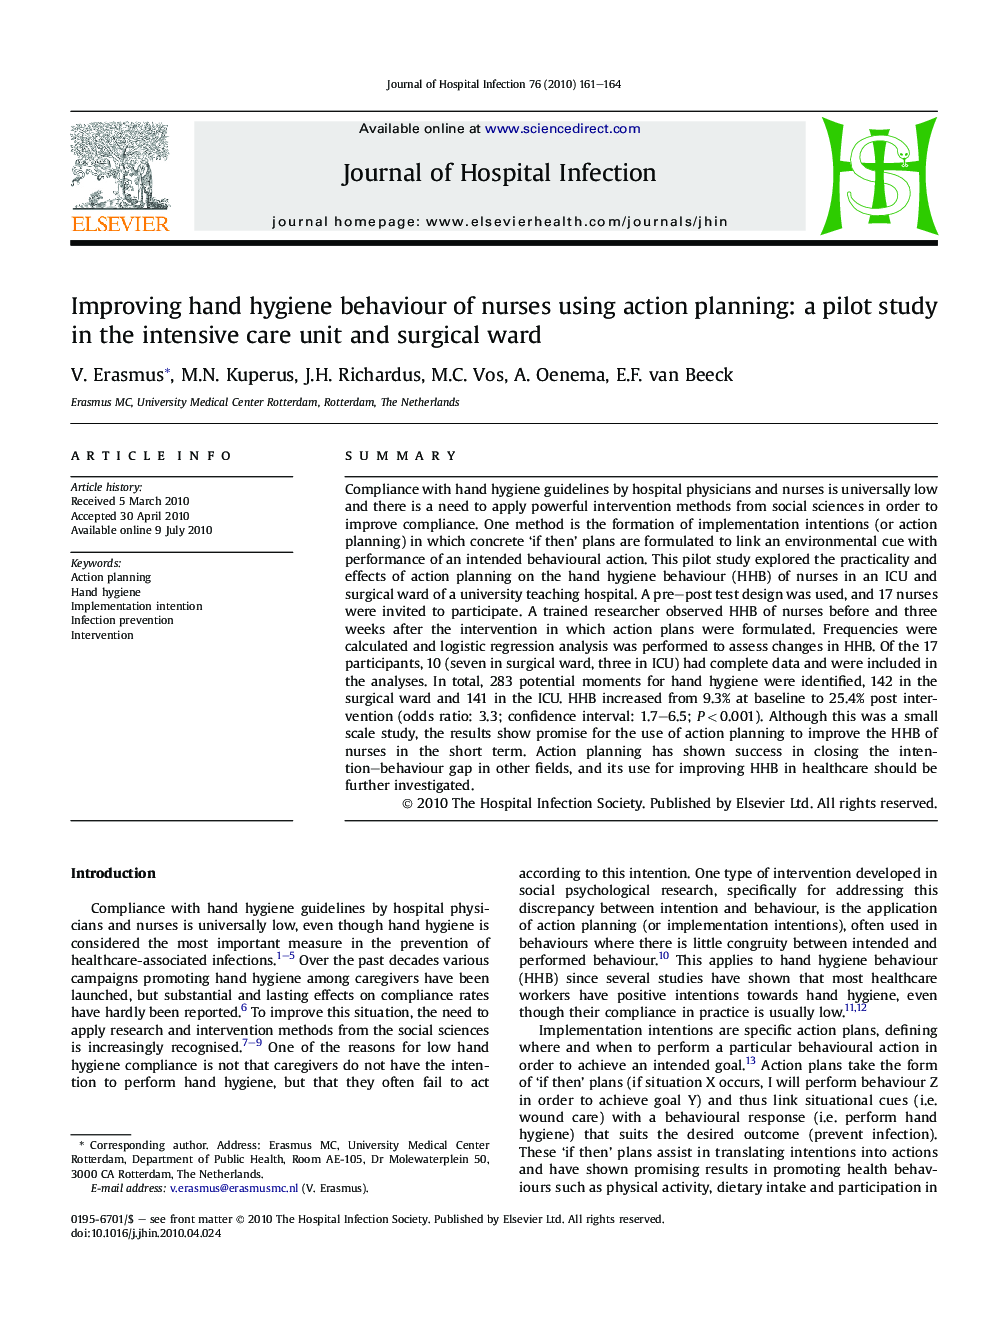 Improving hand hygiene behaviour of nurses using action planning: a pilot study in the intensive care unit and surgical ward